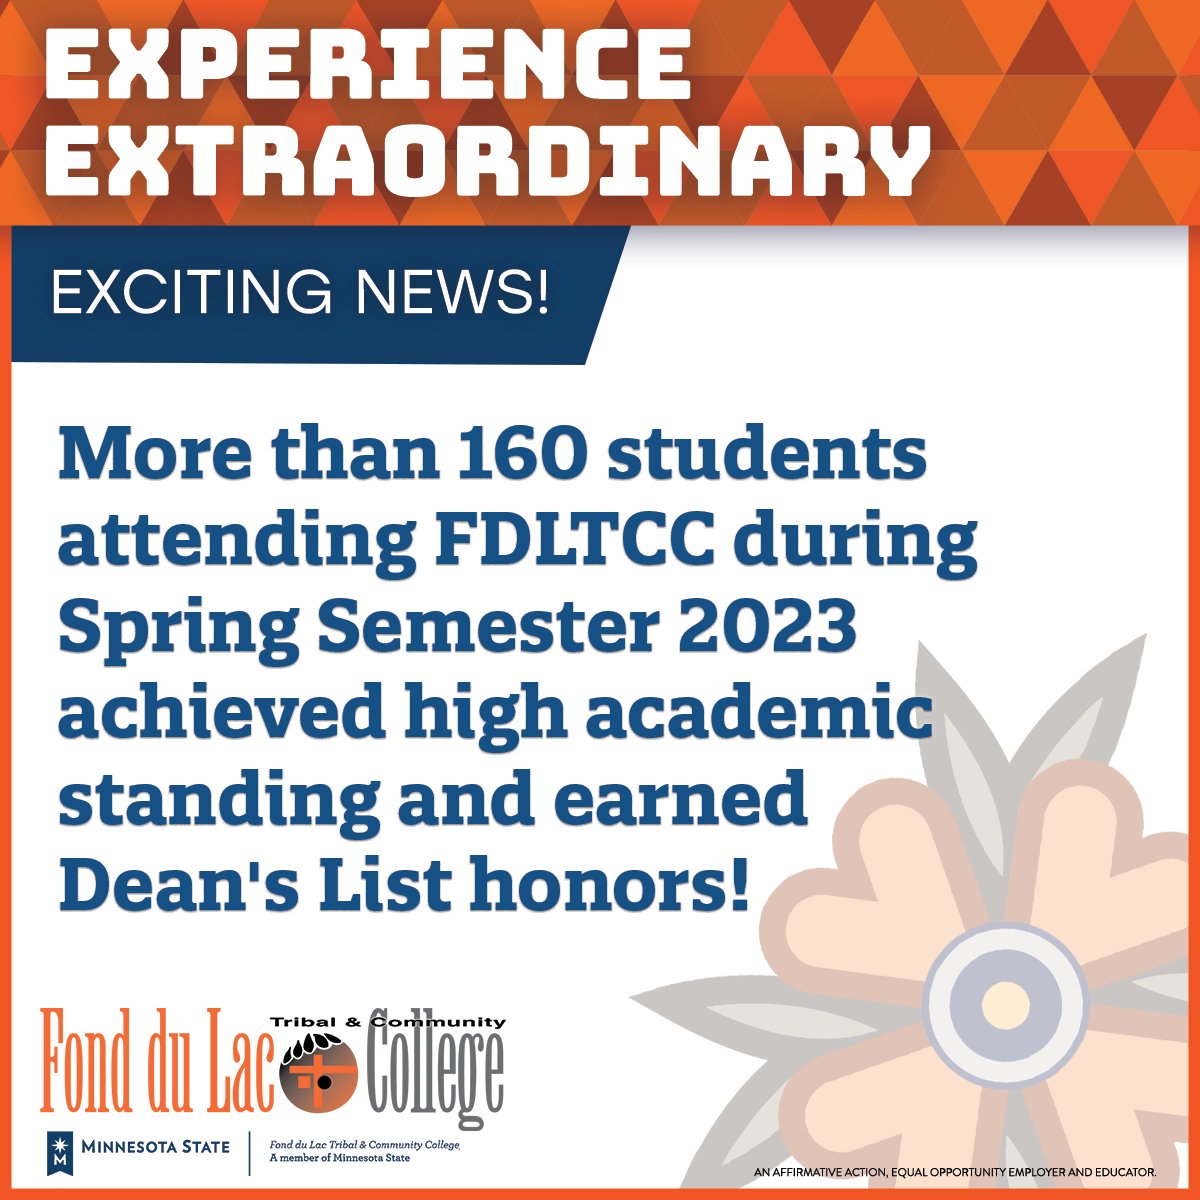 Exciting news! We're thrilled to share more than 160 students attending FDLTCC during Spring Semester 2023 achieved high academic standing and earned Dean's List honors! fdltcc.edu/fdltcc-announc…